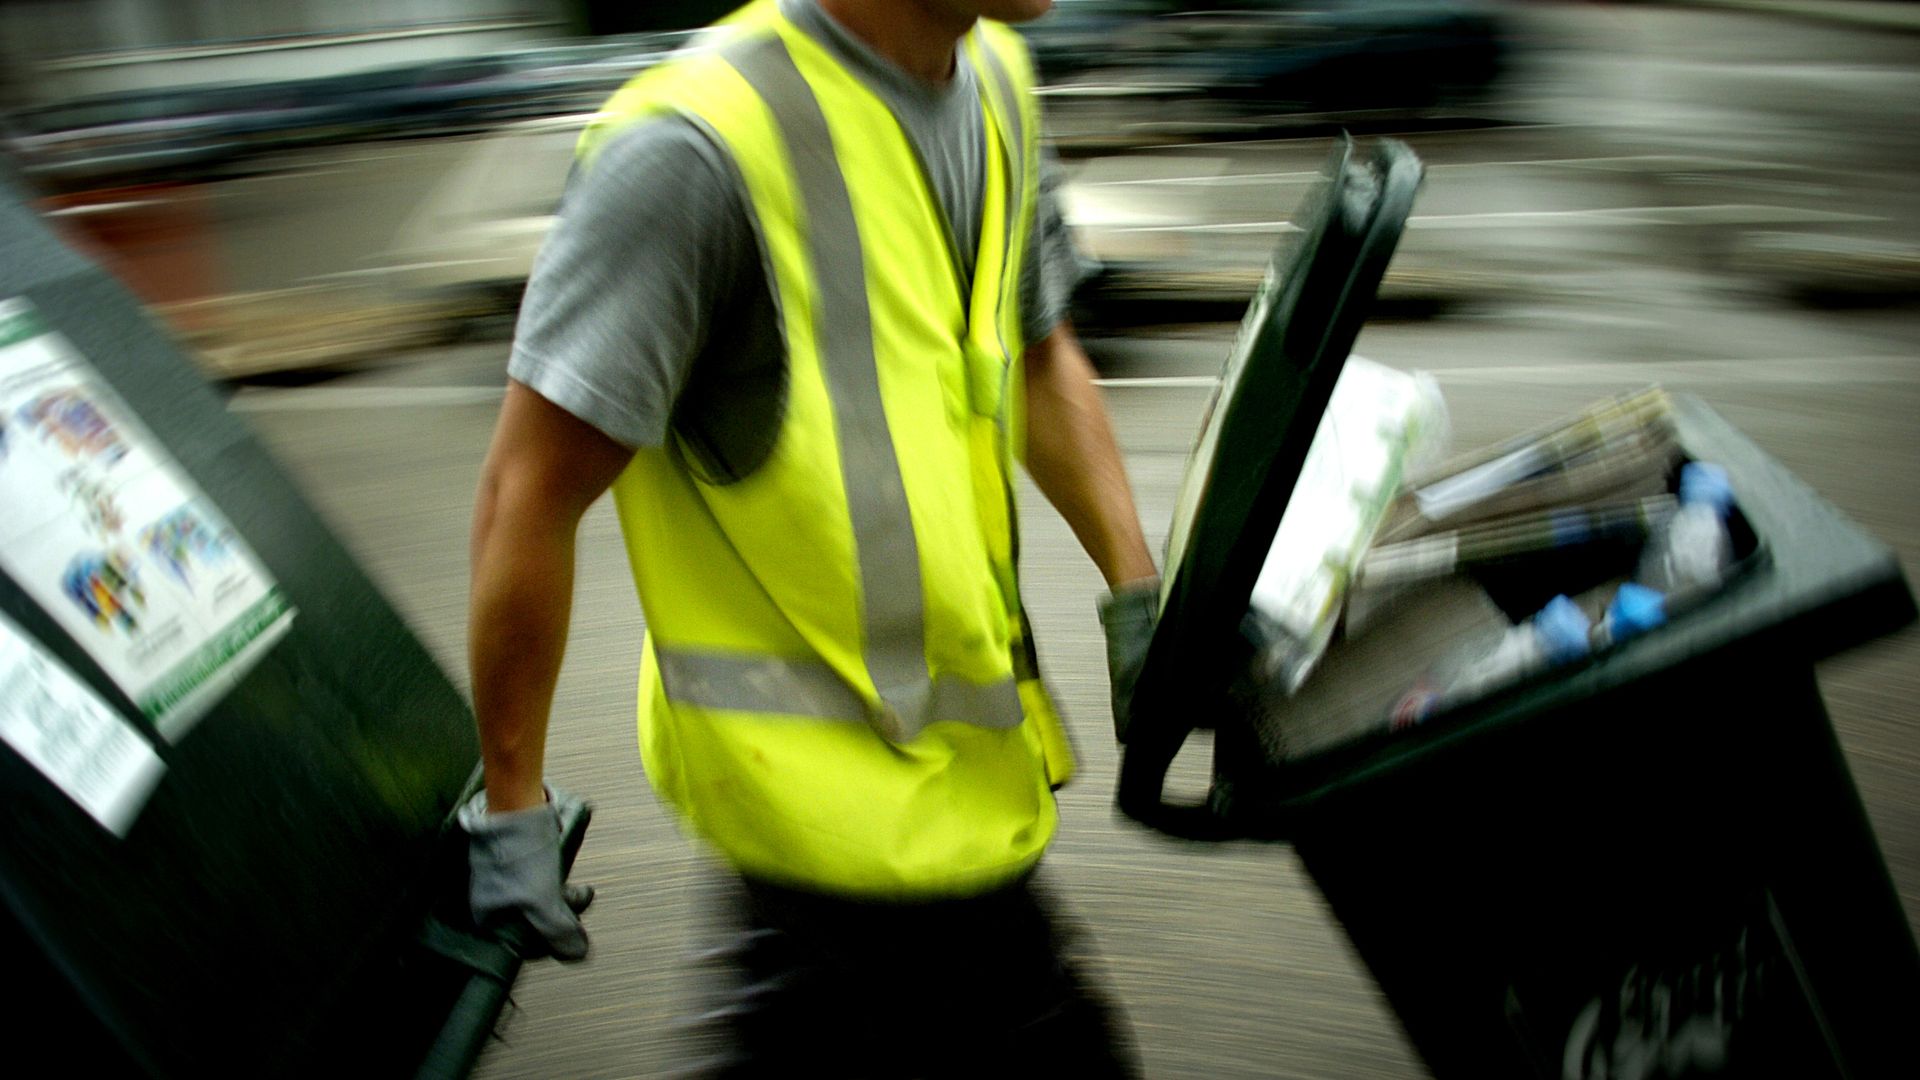 A man in a yellow vest moves two large plastic bins of rubbish.